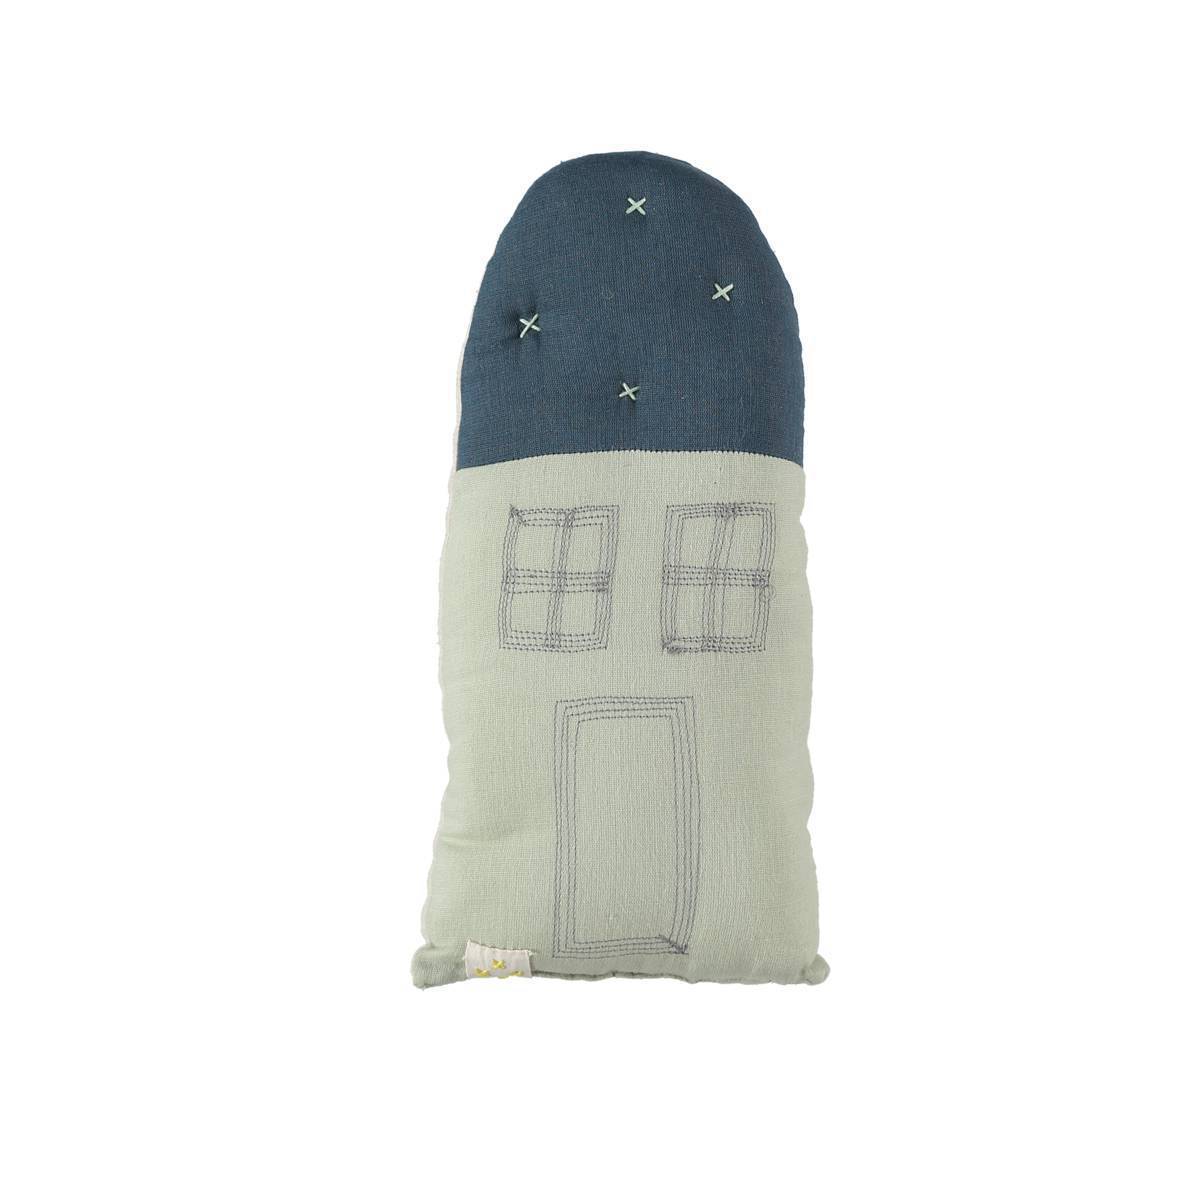 Camomile London | petite house kids cushion | mint and midnight blue